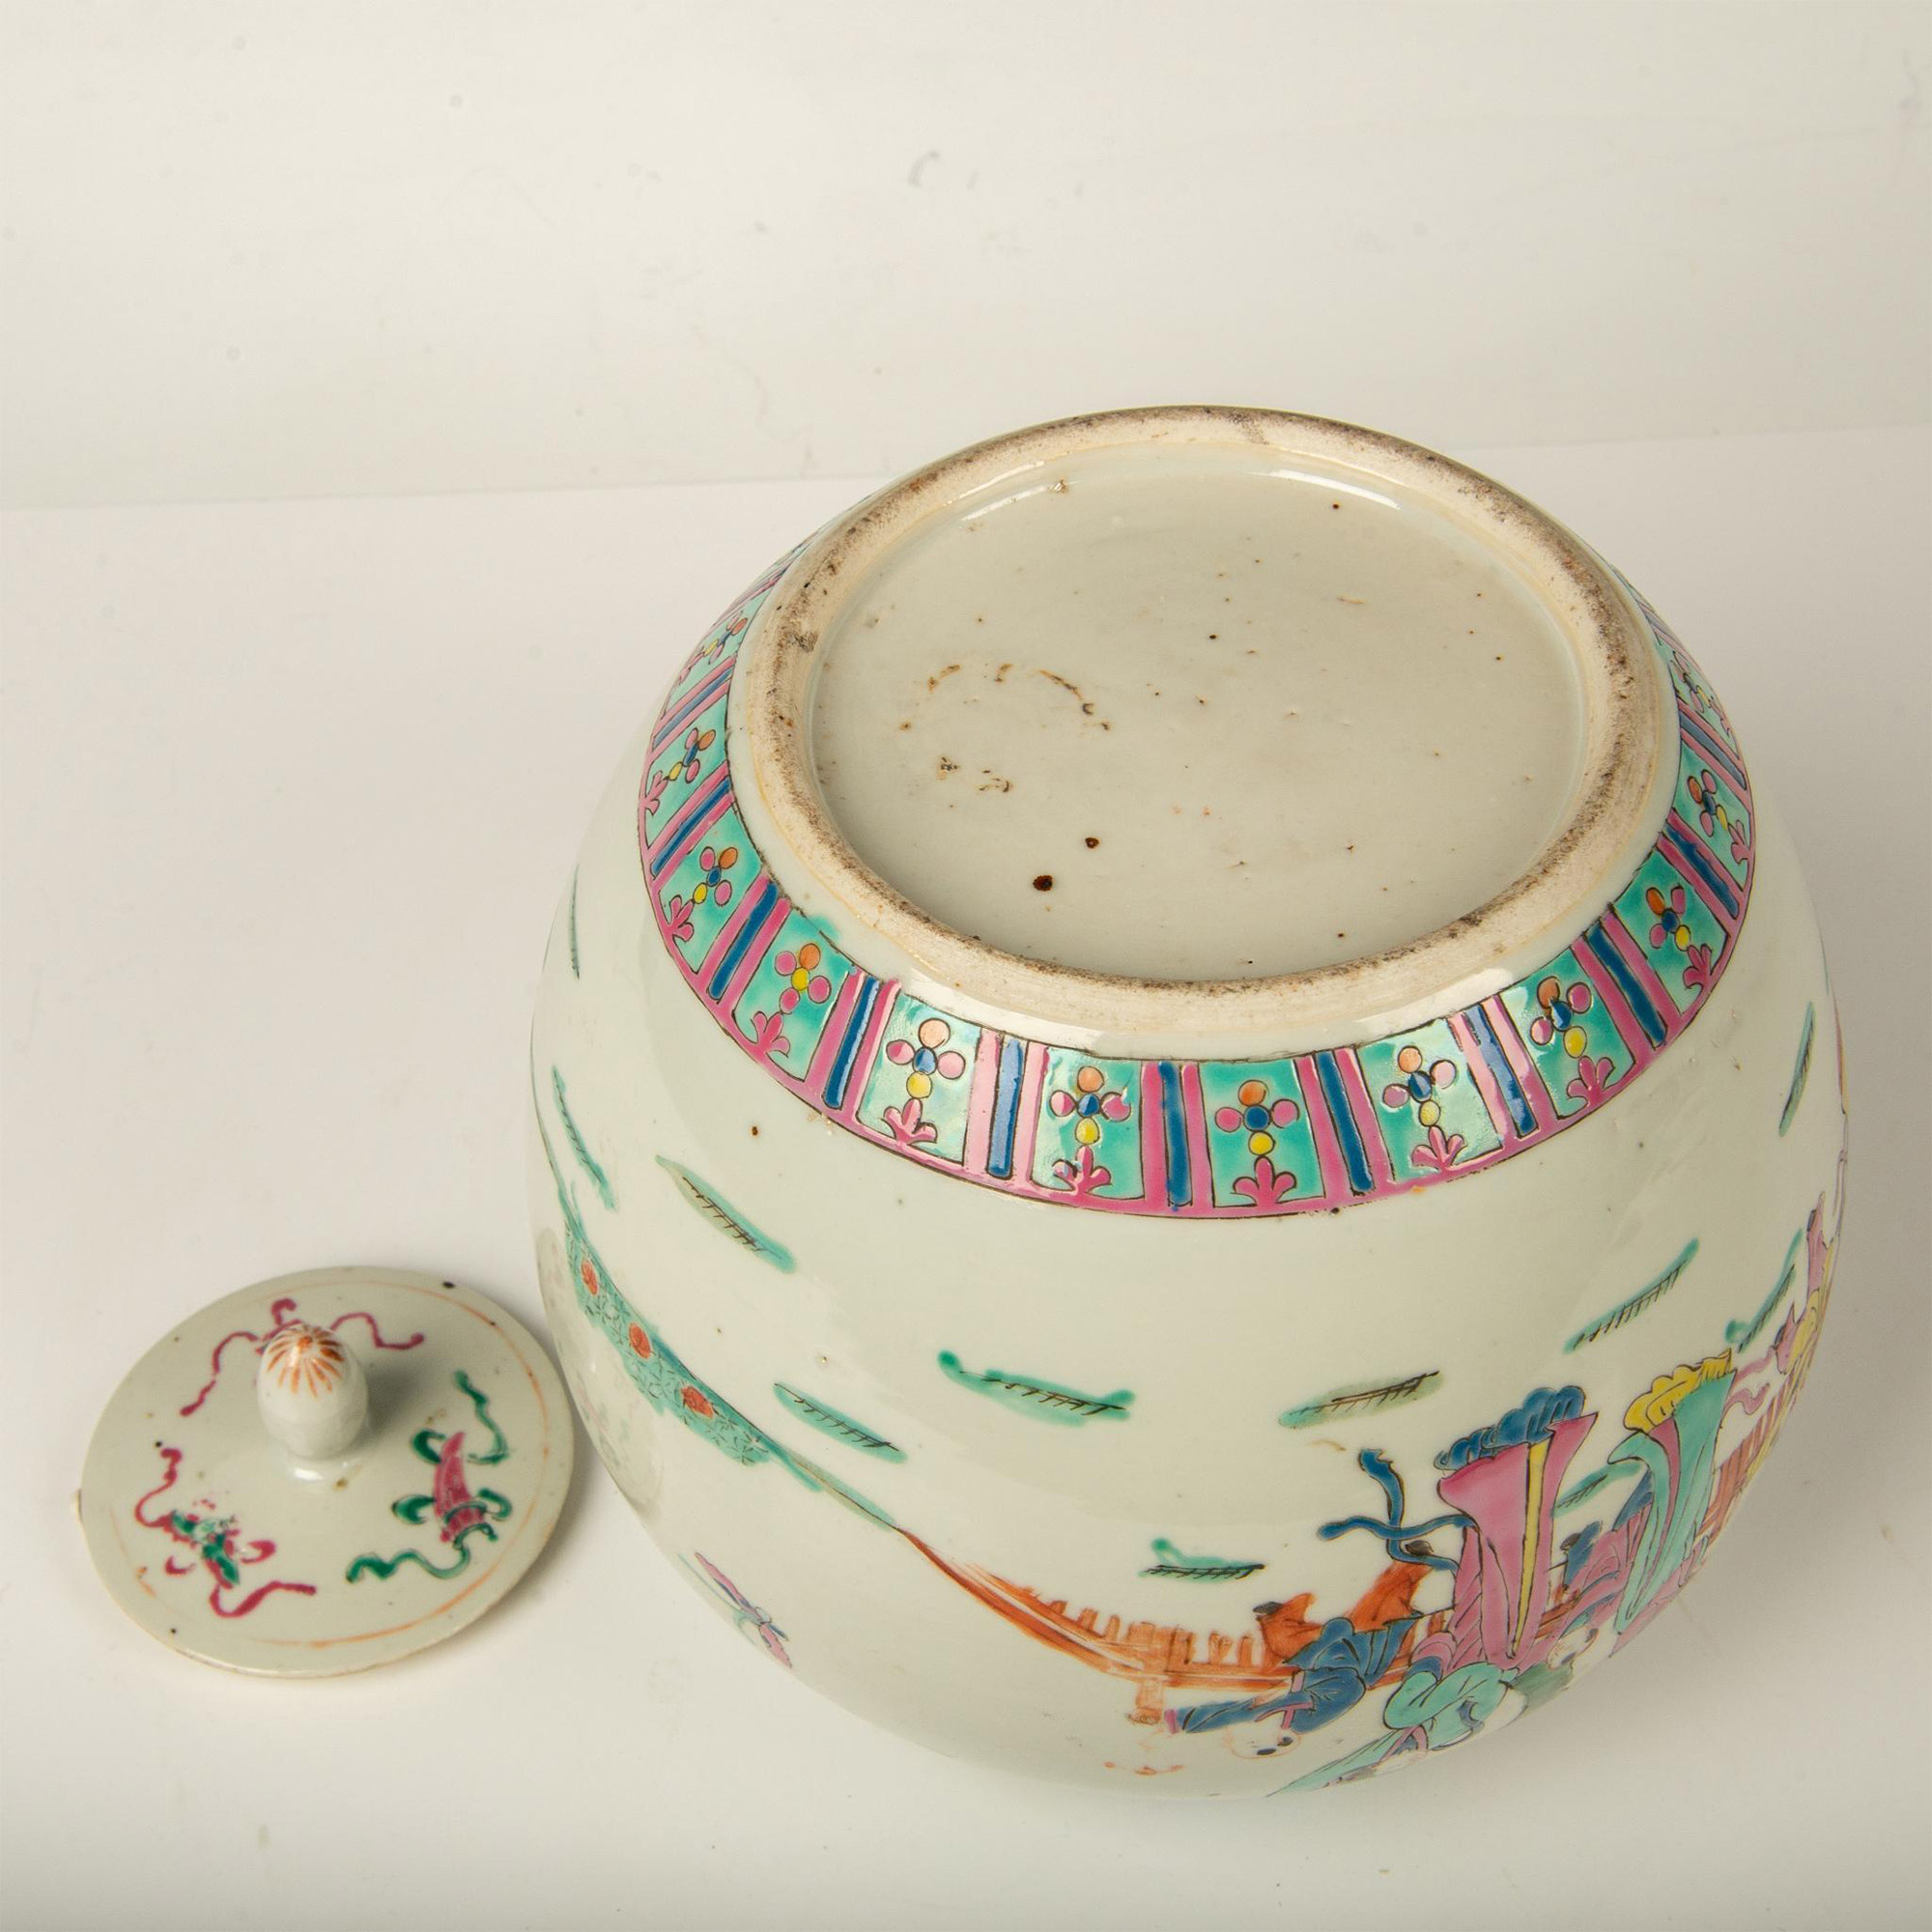 Antique Chinese Porcelain Covered Ginger Pot - Image 6 of 6